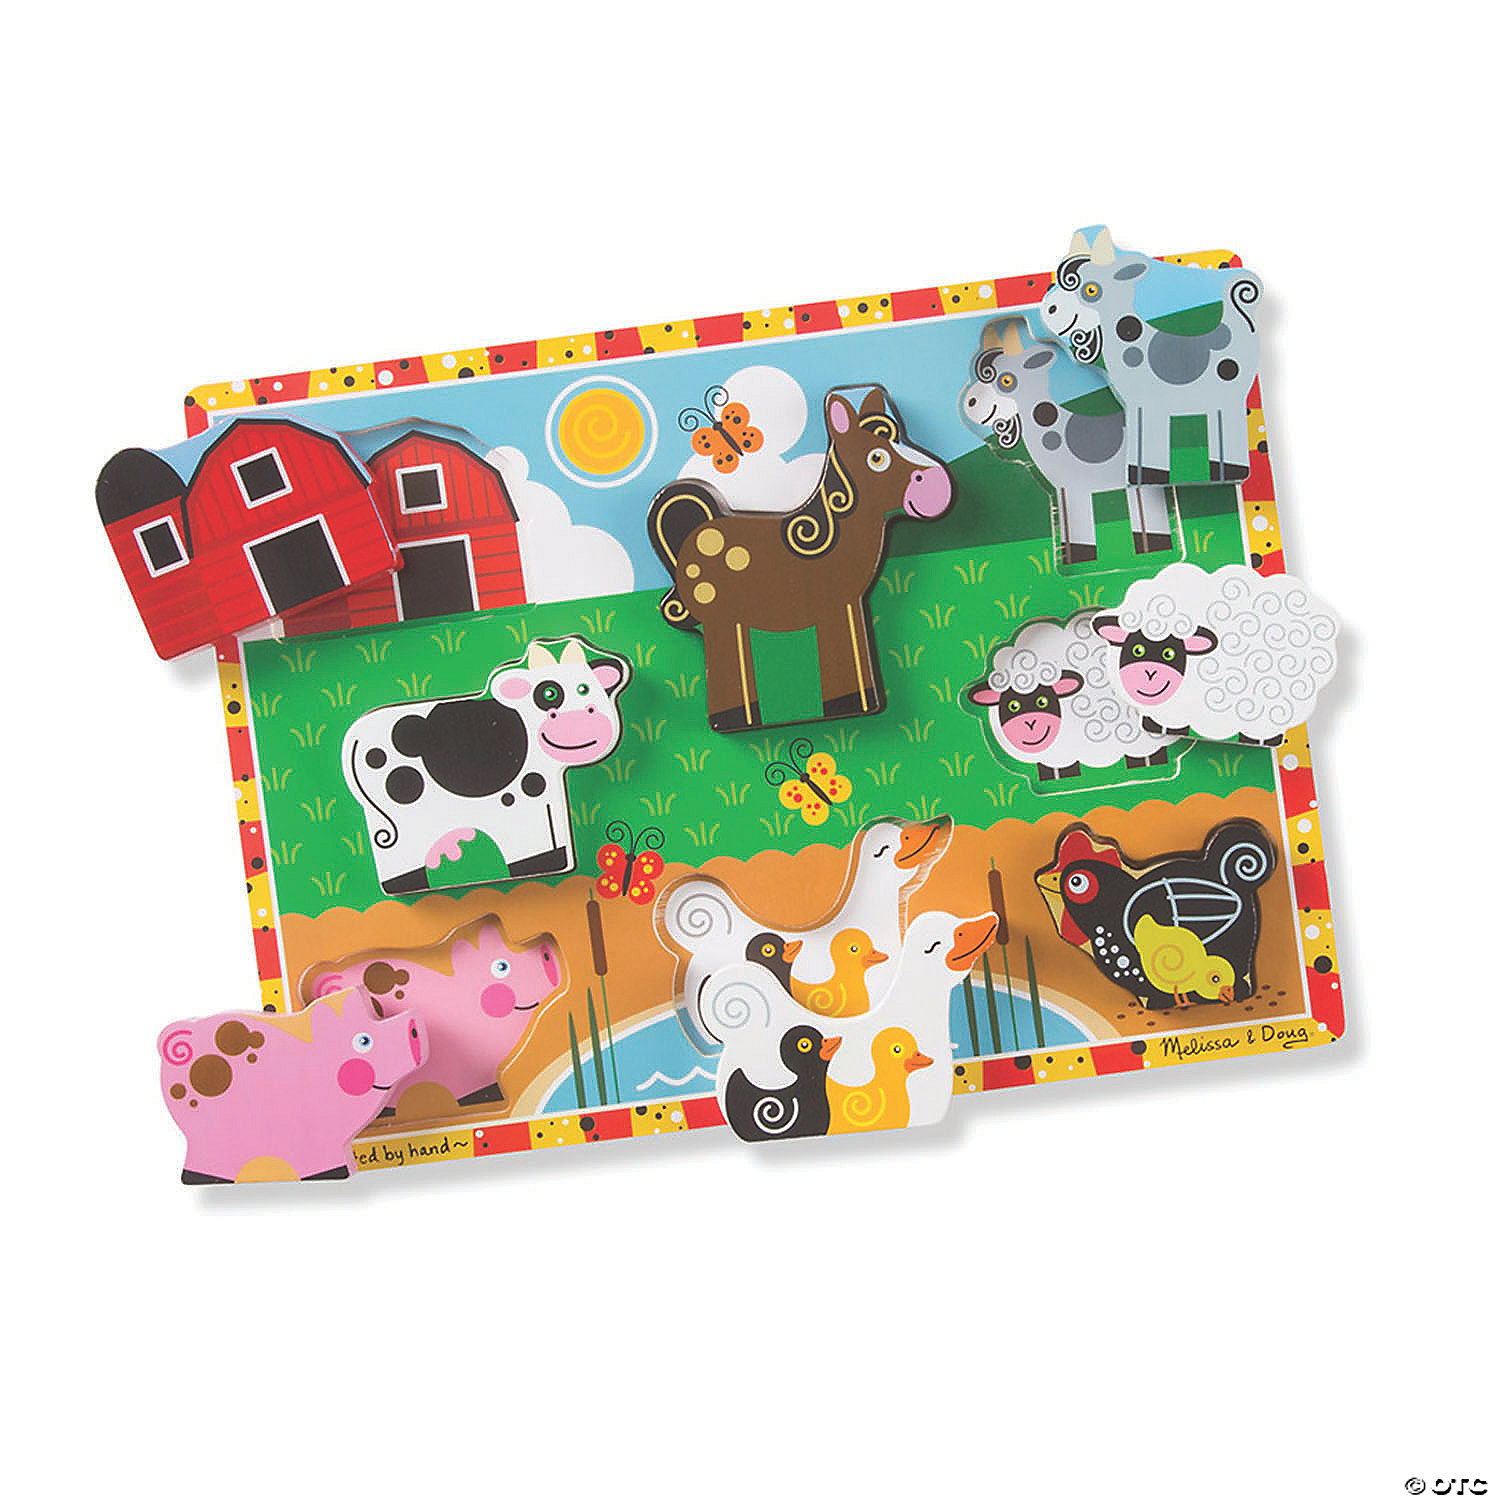 My Food' puzzle Animals 12992, Toys \ Jigsaw & puzzle